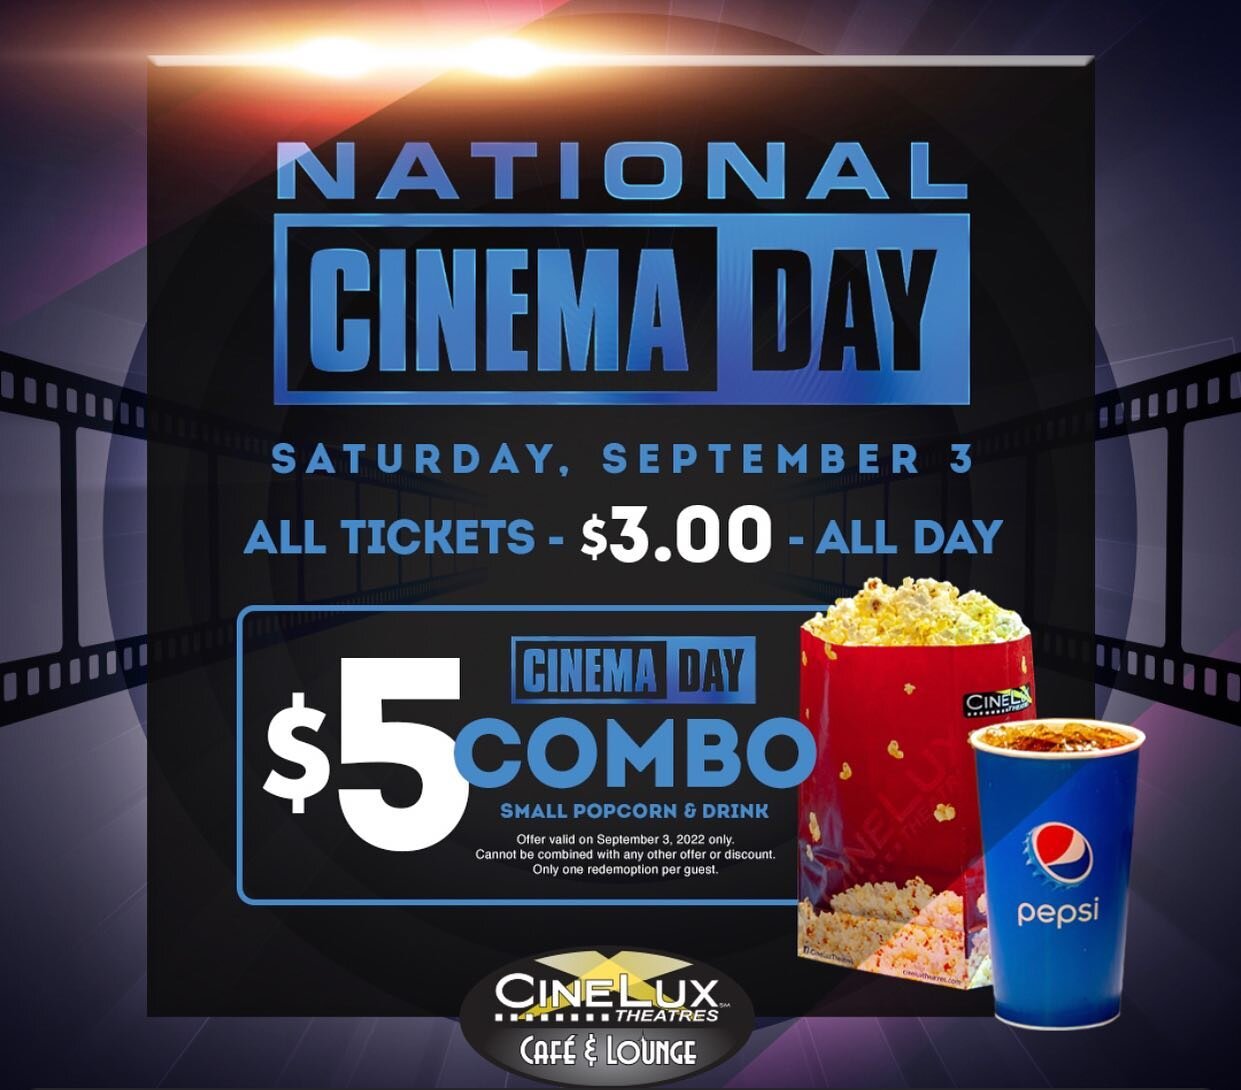 Love the movies? Love $3.00 admission? Visit Cineluxe Tennant Station today to enjoy air conditioning and $3.00 movie tickets all day long 🎥 #95037 #buylocalmorganhill #choosemorganhill #morganhilllife #morganhillliving #morganhillca #morganhillcali